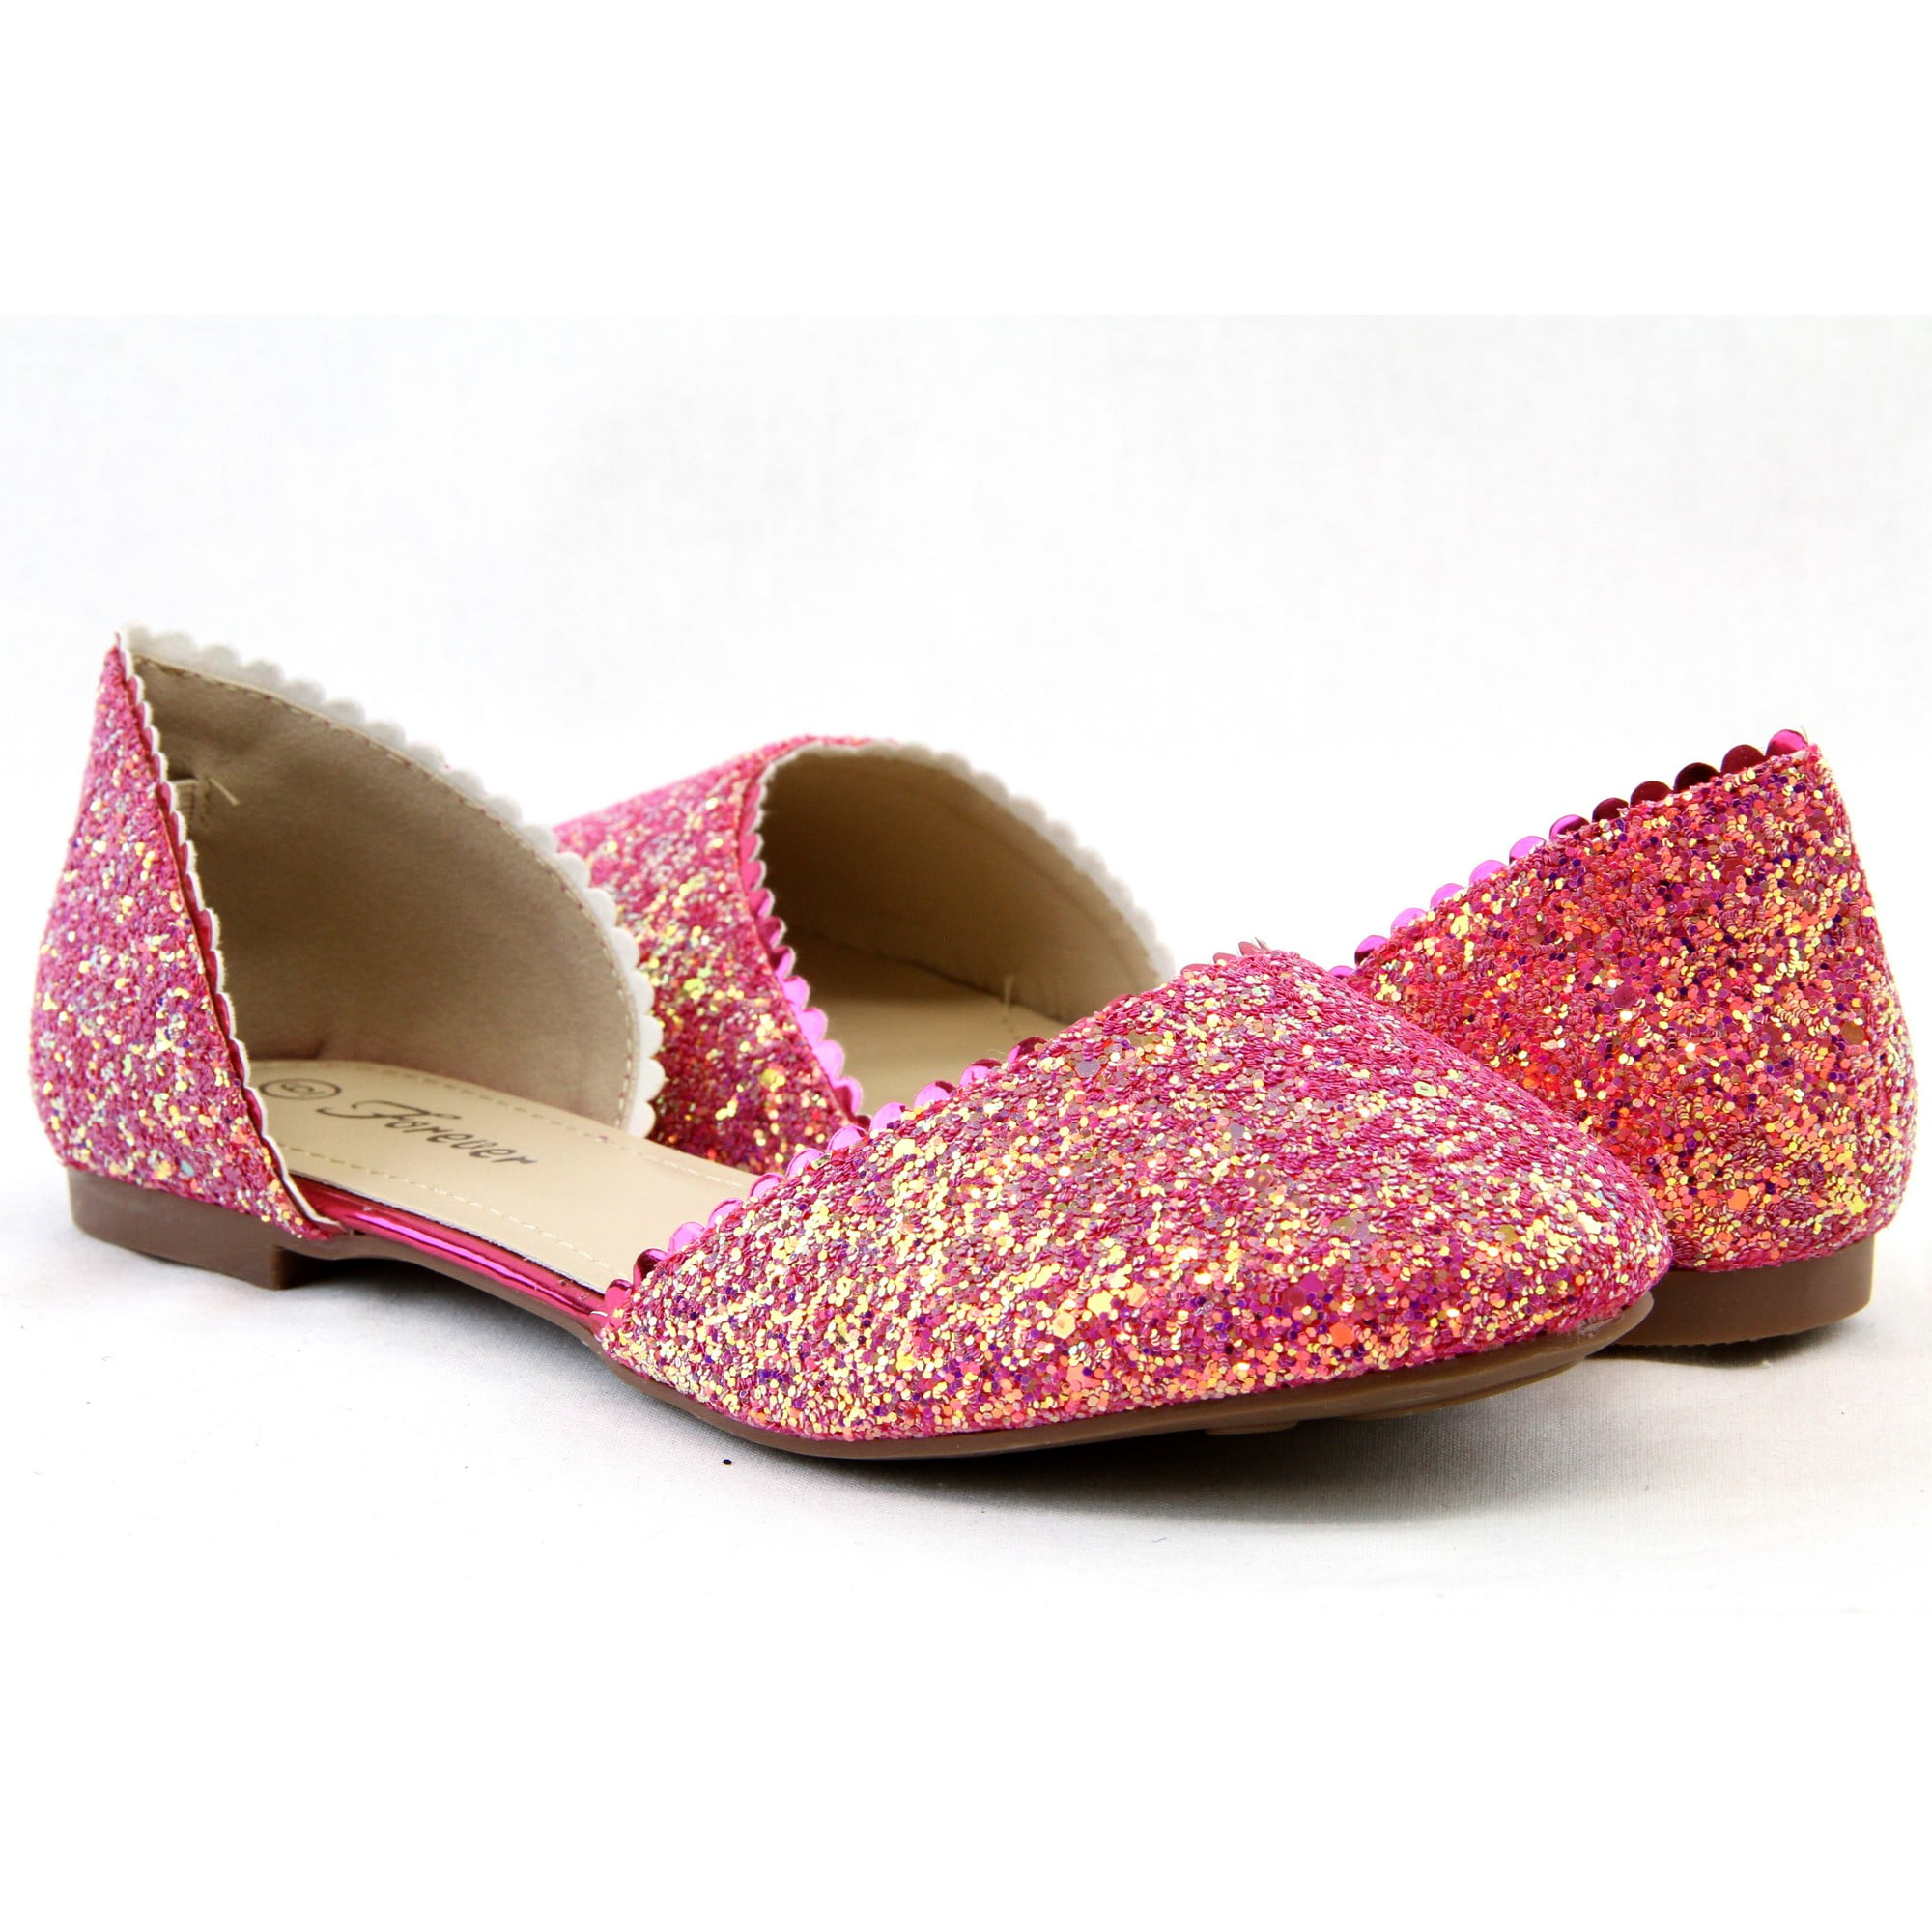 Women's Fuchsia Floral Pointed Toe Casual Slip On Ballet Flats Angie